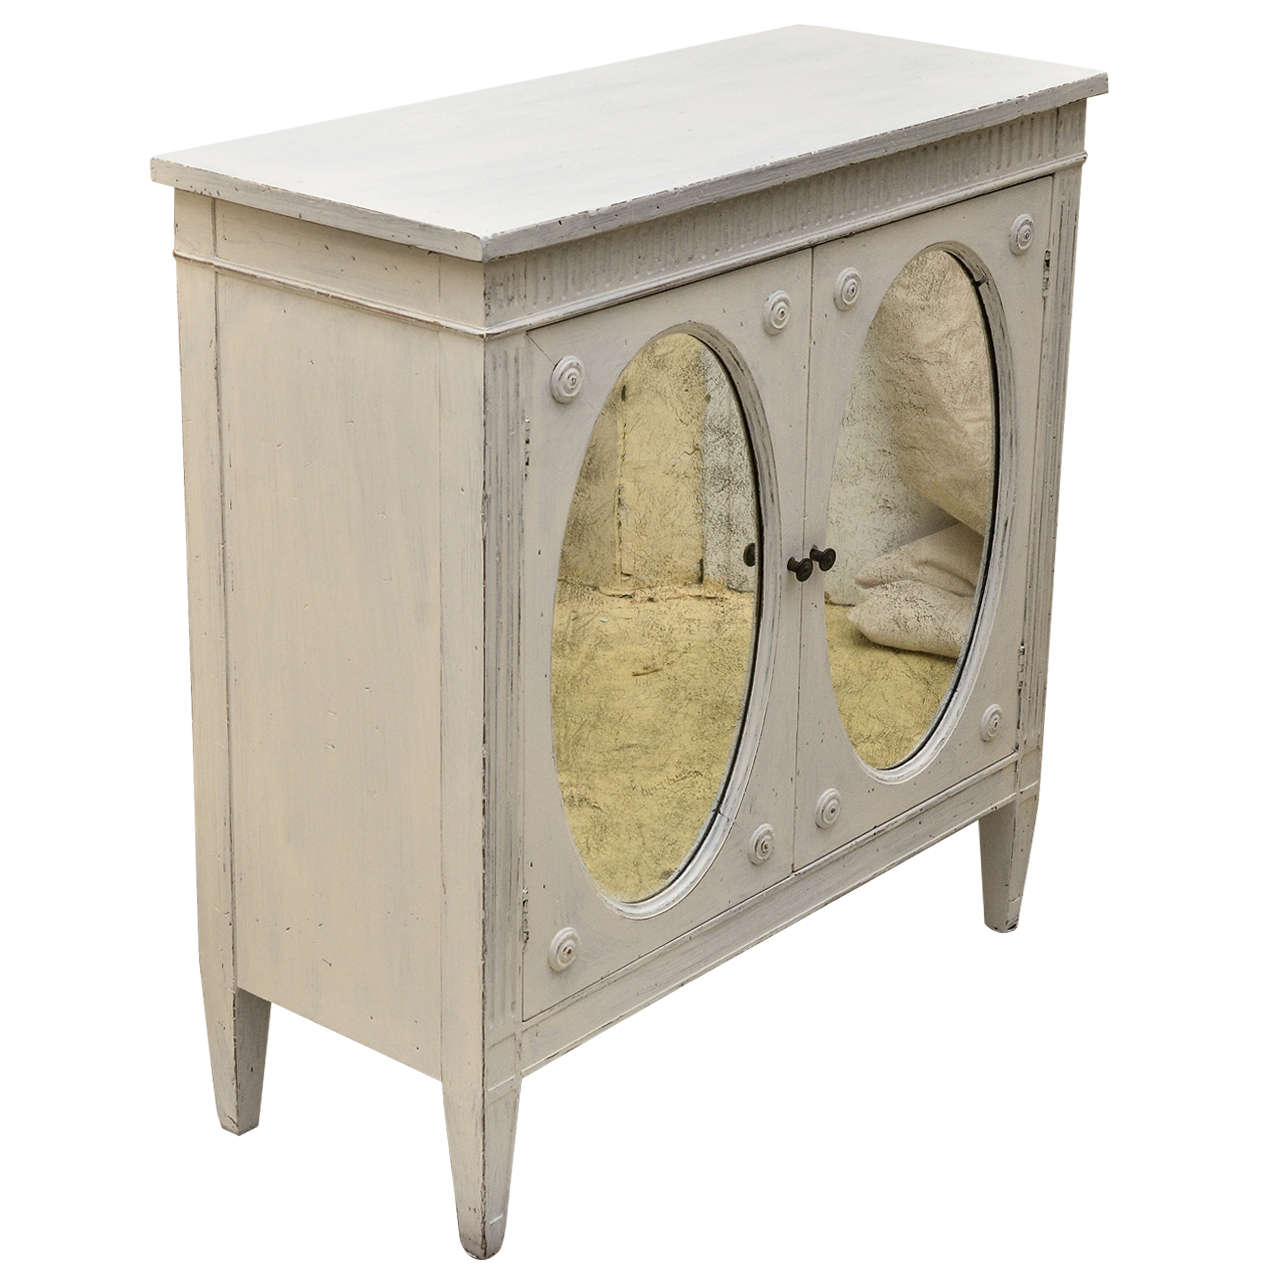 Gustavian Style Distressed Painted Oval Mirror 2 Door Cabinet